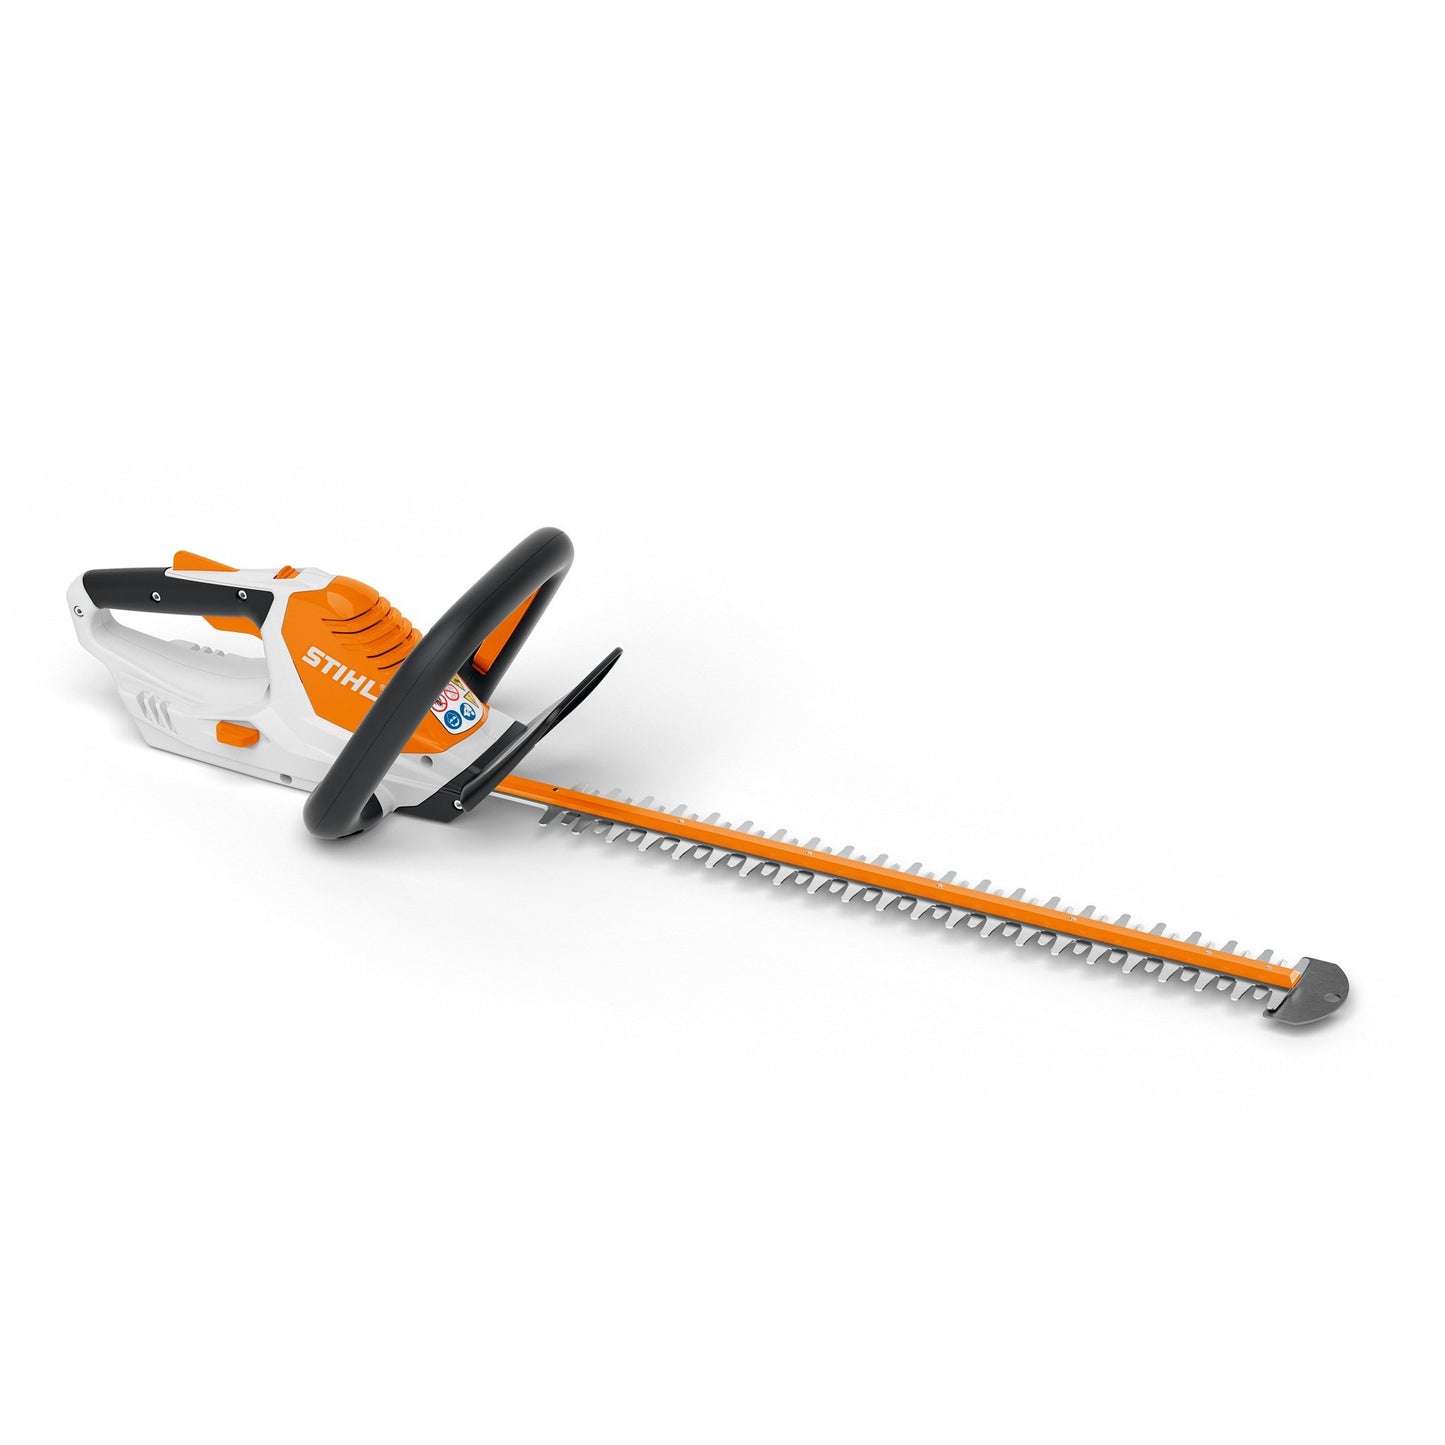 STIHL HSA 45 Cordless Hedge Trimmer w/ Integrated Battery